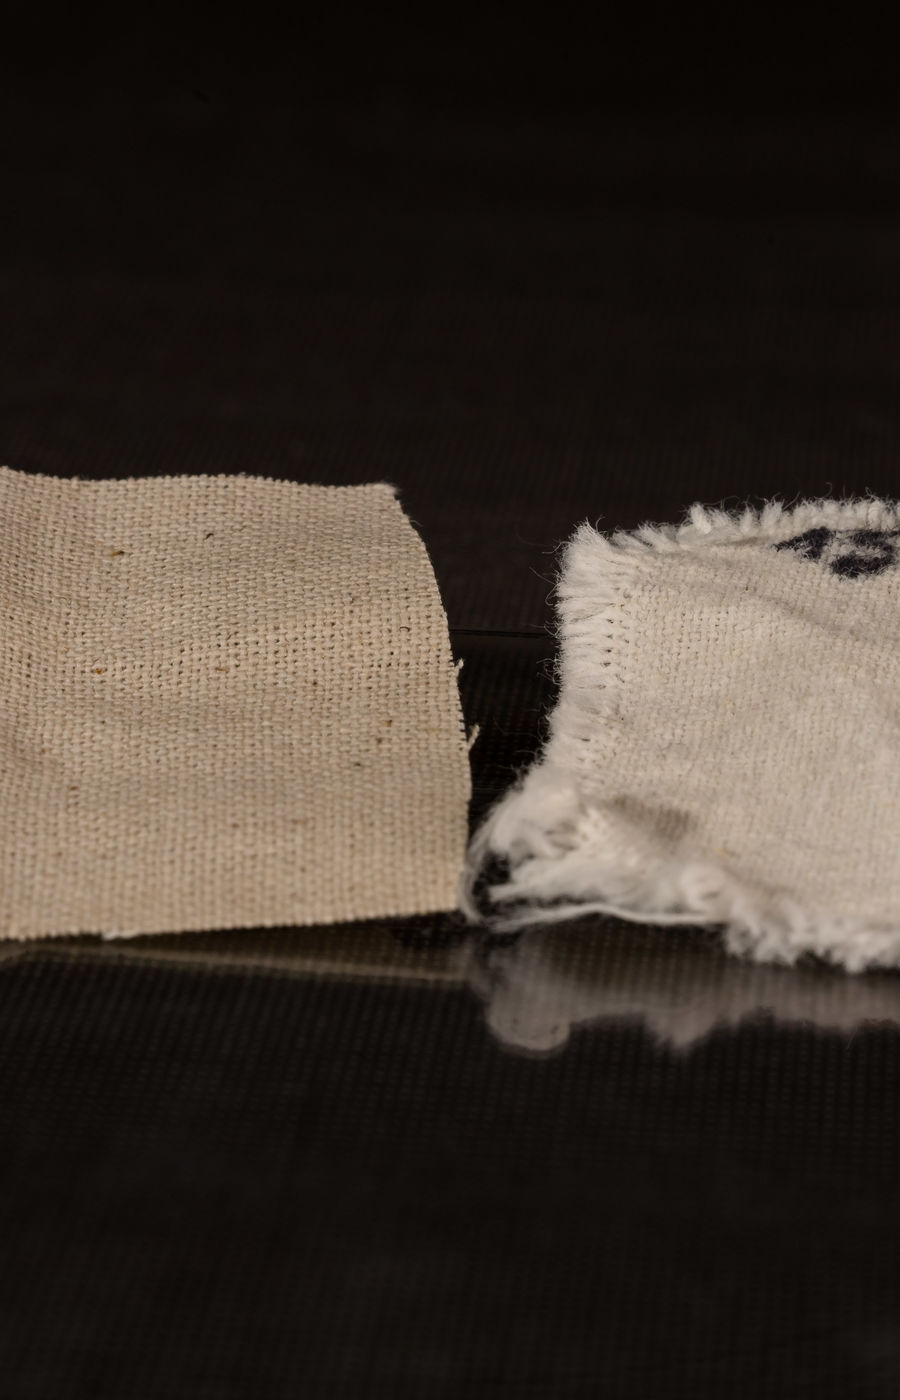 Cotton treated with zinc oxide. Photo by Mikael Nyberg